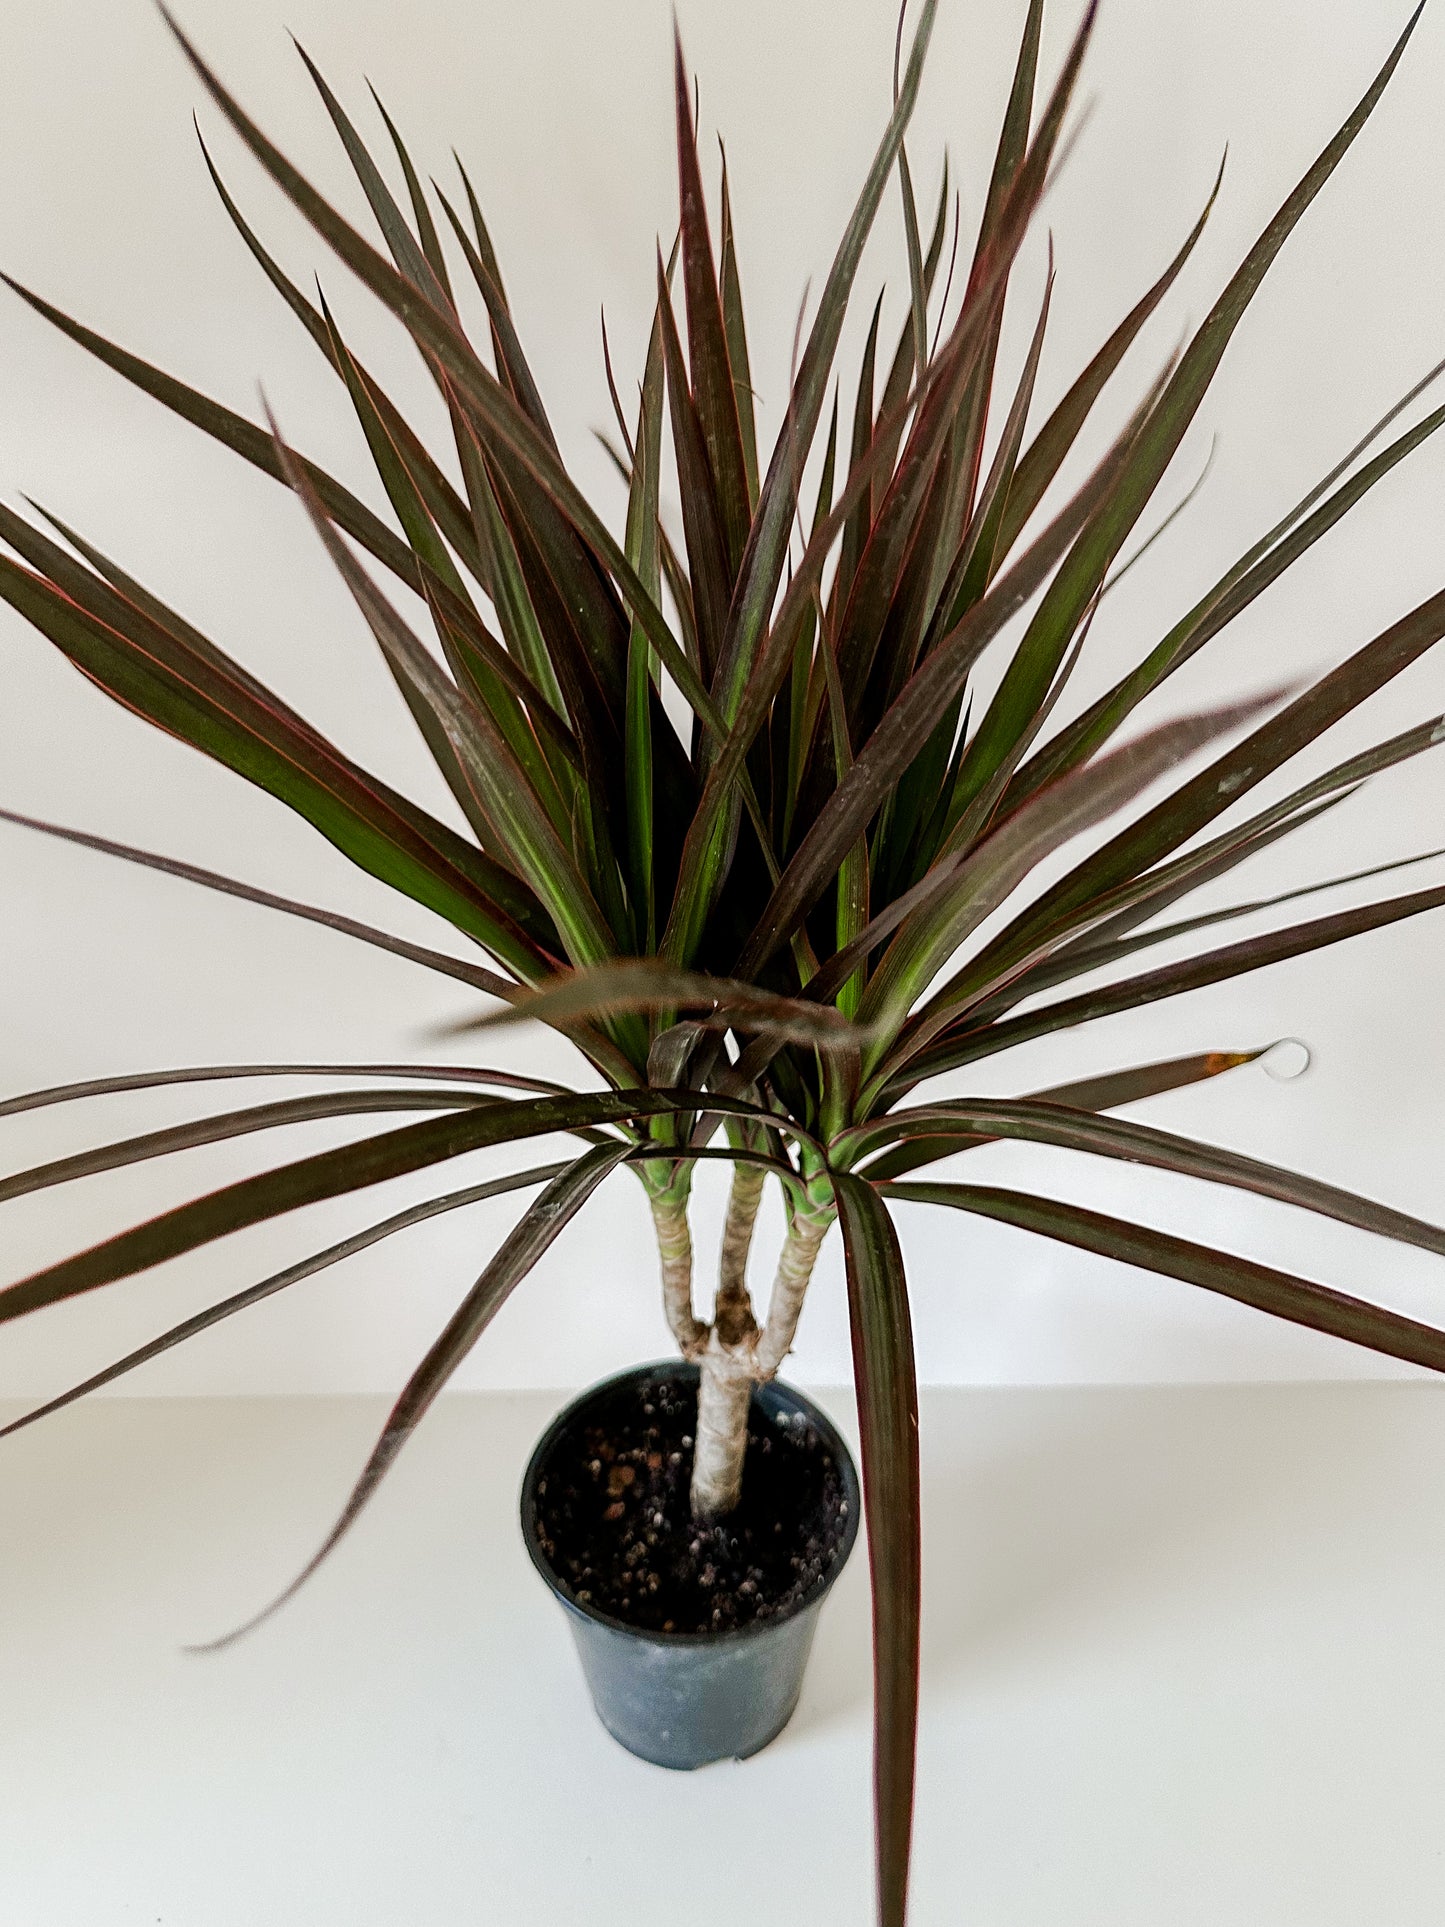 Dracaena 'Marginata Magenta'- Cute, 🌱 Beginner Friendly, Low Maintenance Tropical Tree Plant For Office or Low Light Rooms- (4 Inch or 6 Inch Nursery Pot)